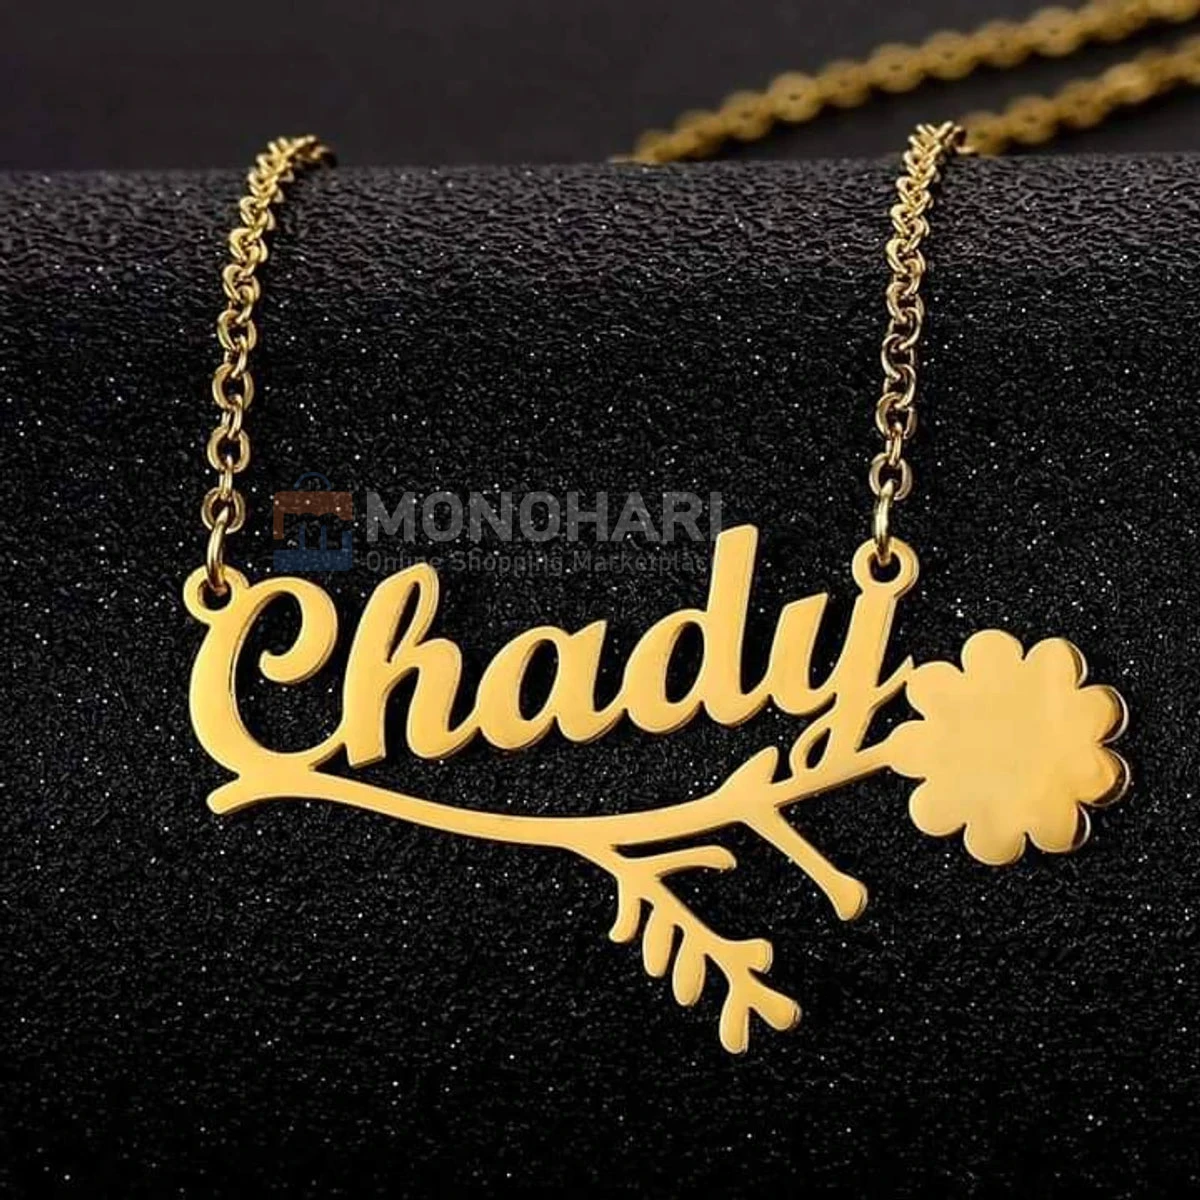 Name Necklace (Chady) Flower with Leaf (Monohari) 22K Gold Plated